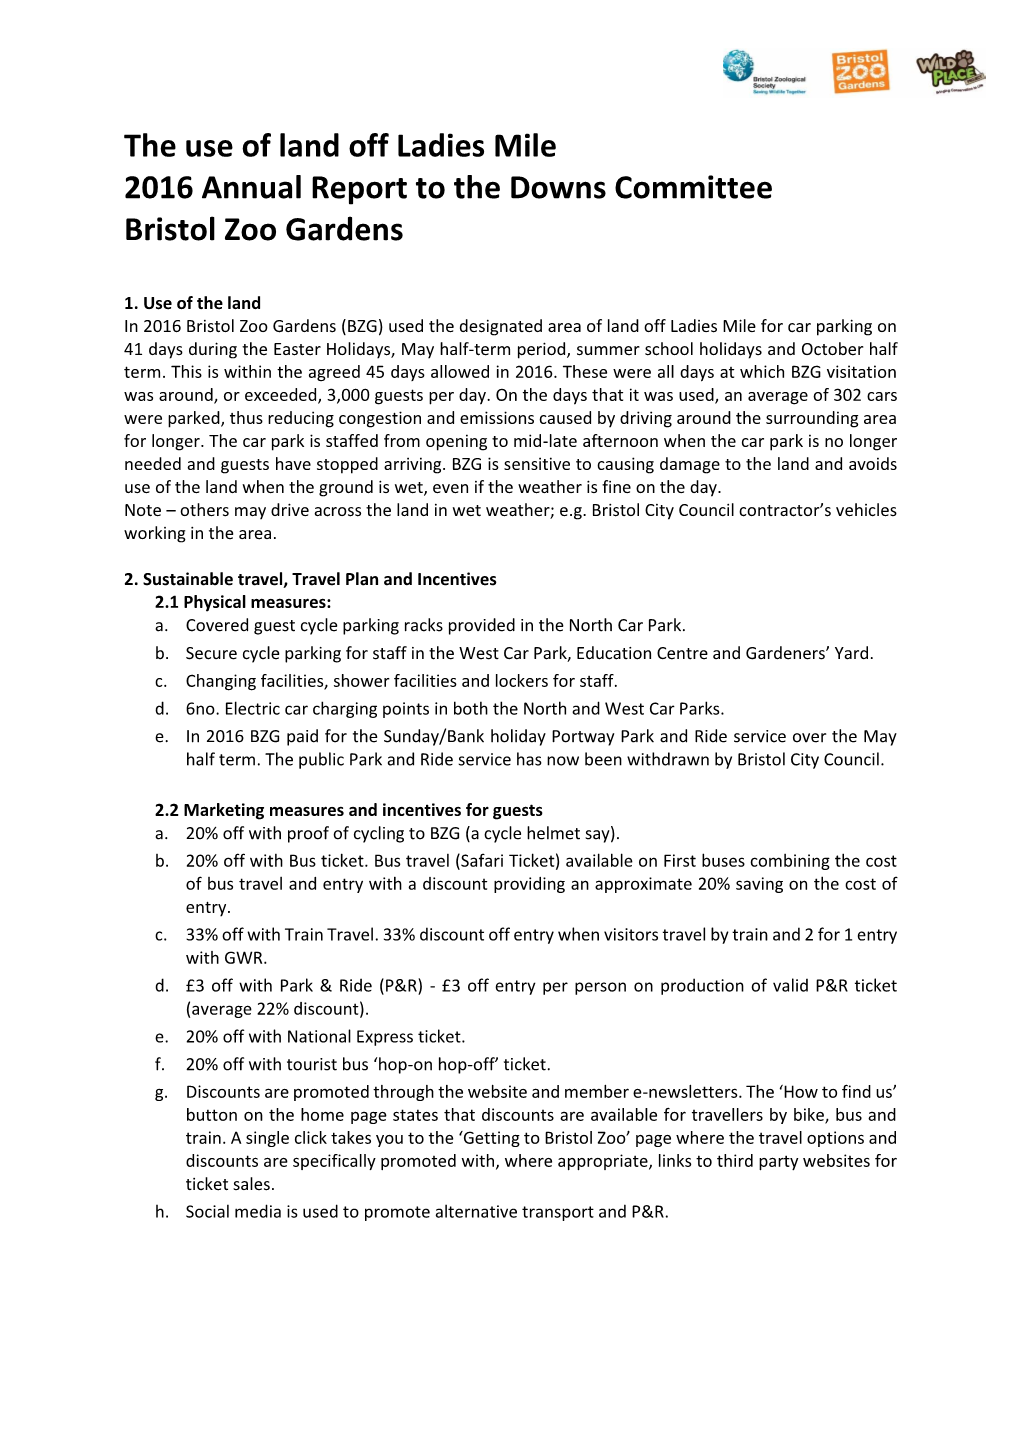 The Use of Land Off Ladies Mile 2016 Annual Report to the Downs Committee Bristol Zoo Gardens